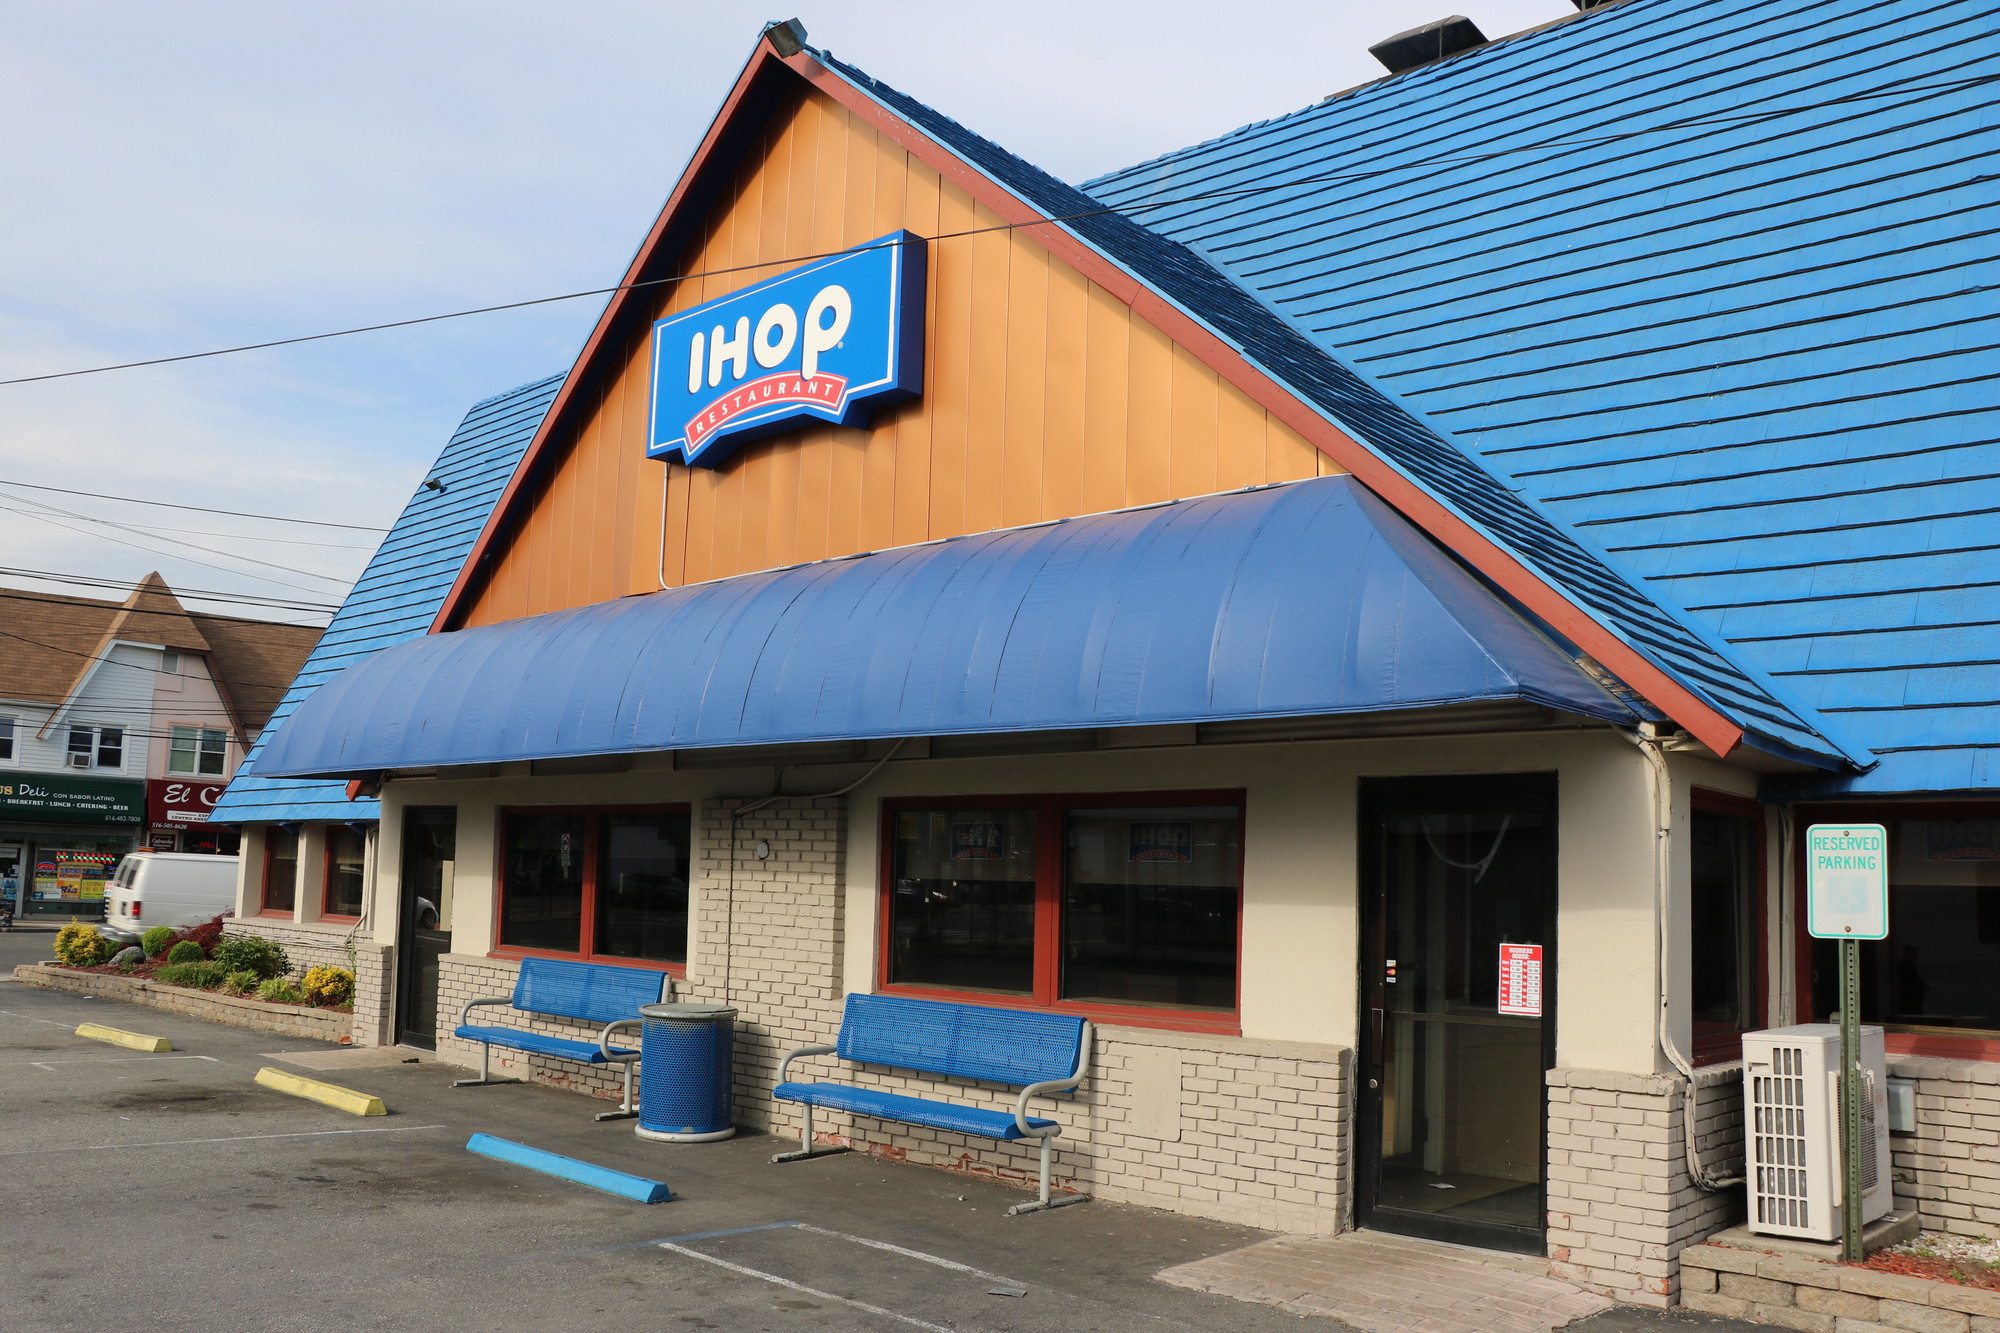 The manager of this IHOP restaurant said its doors would close at the end of the month.